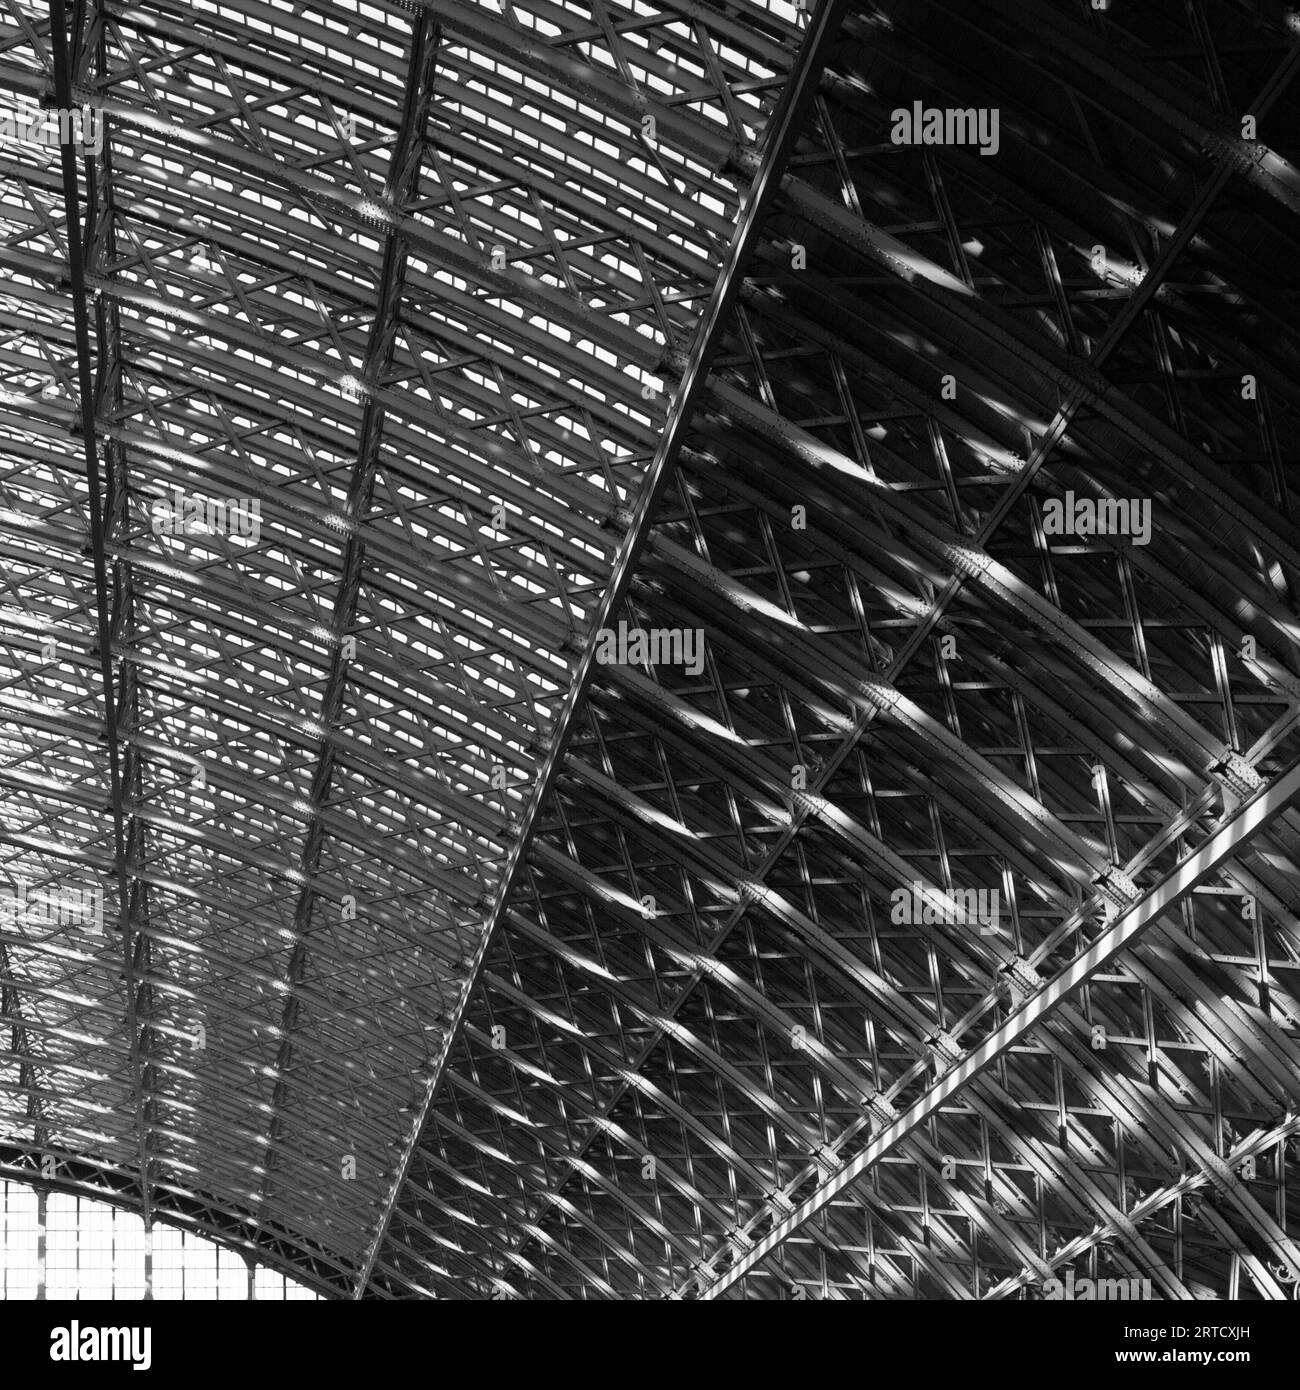 The Single Span Arched Roof Of Saint Pancras Railway Station MAde Of Wrought Iron And Glazed, London England UK Stock Photo